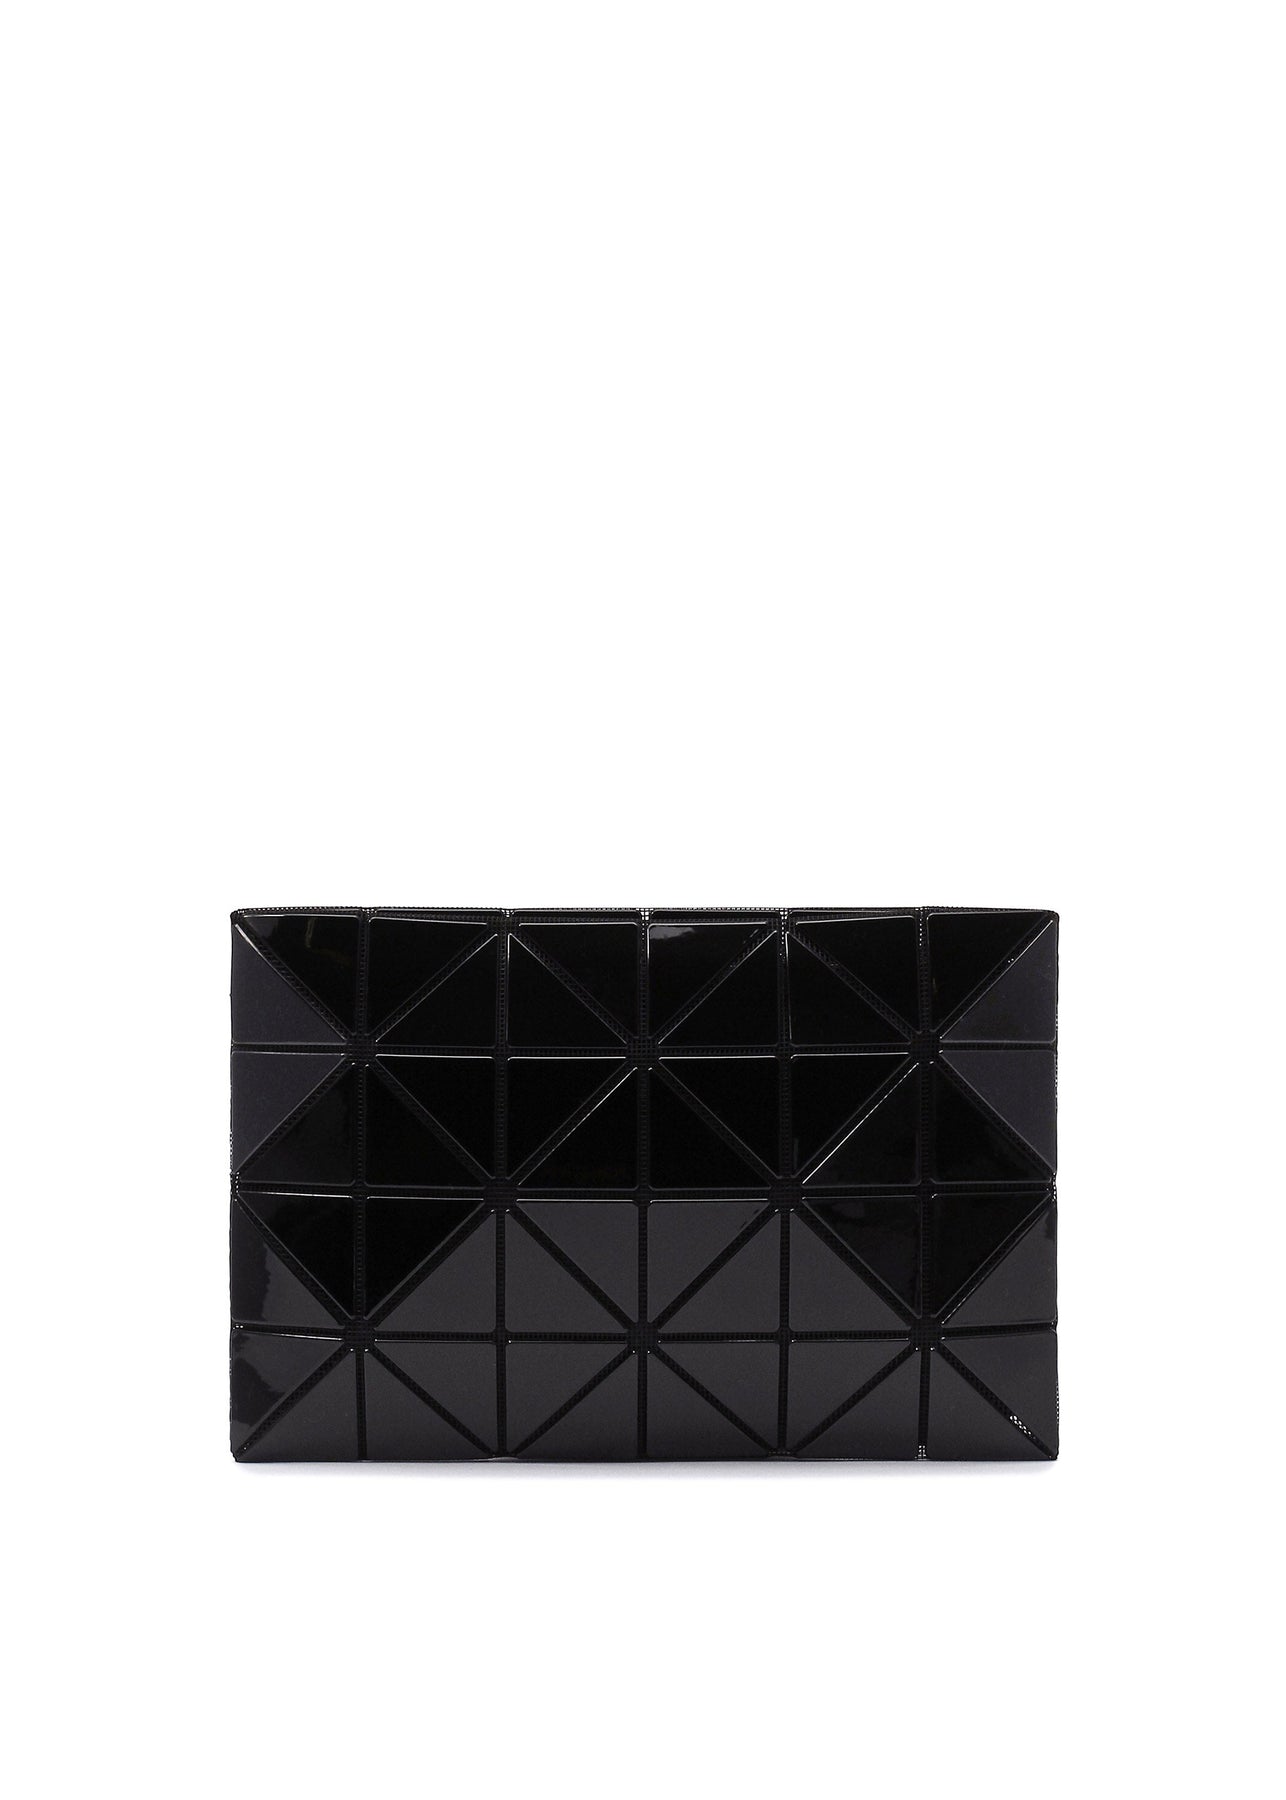 LUCENT POUCH | The official ISSEY MIYAKE ONLINE STORE | ISSEY